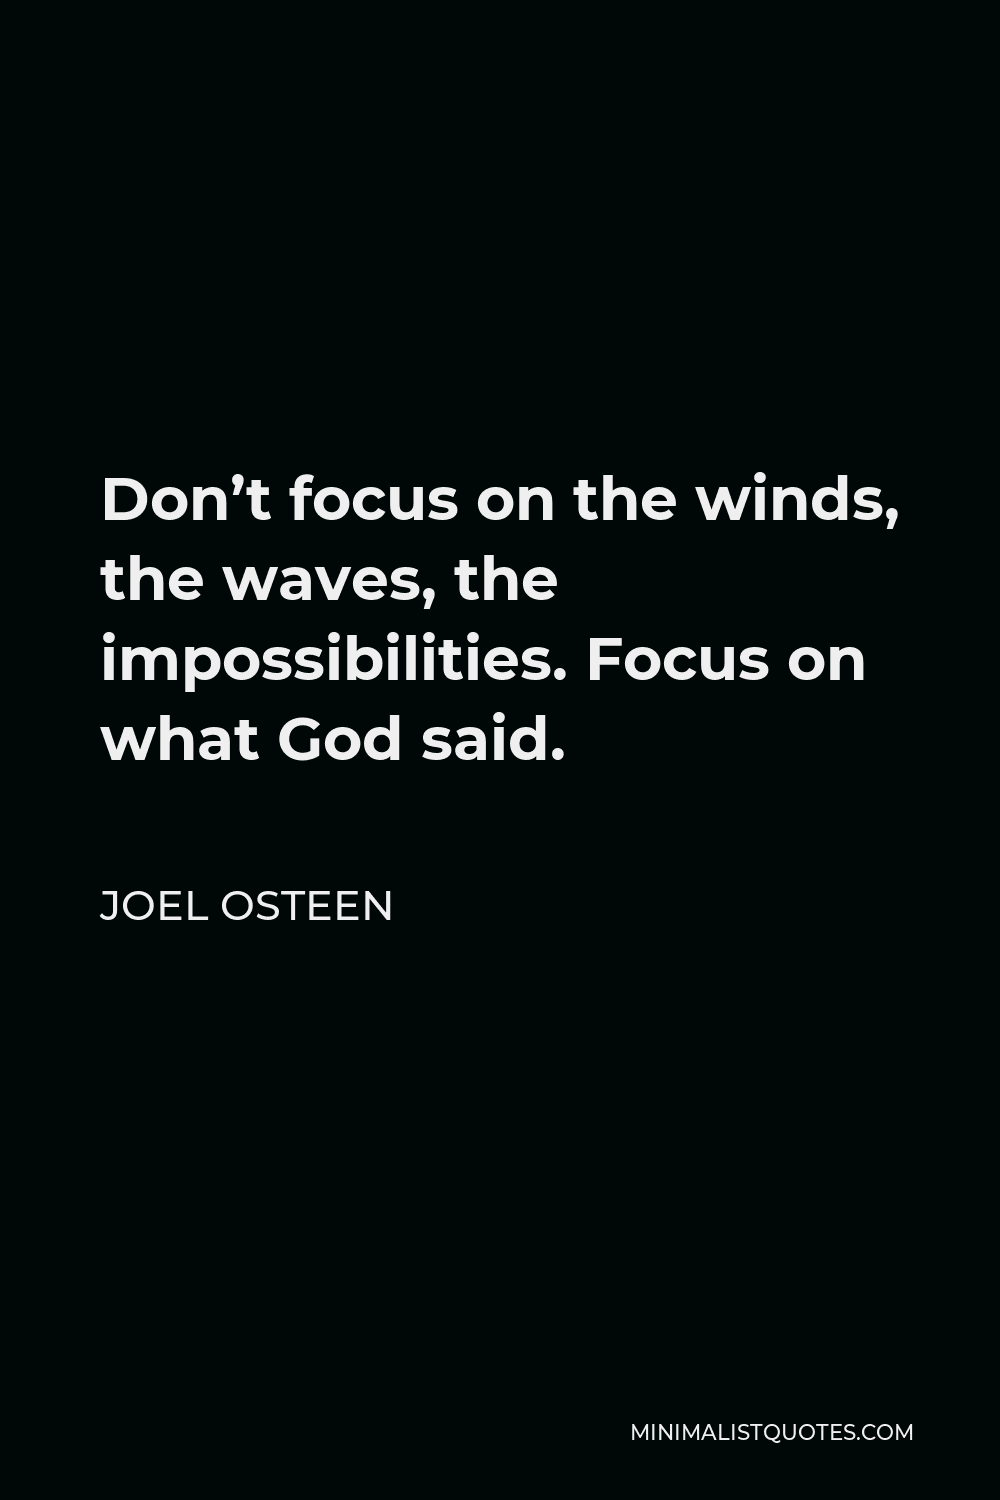 Joel Osteen Quote - Don’t focus on the winds, the waves, the impossibilities. Focus on what God said.